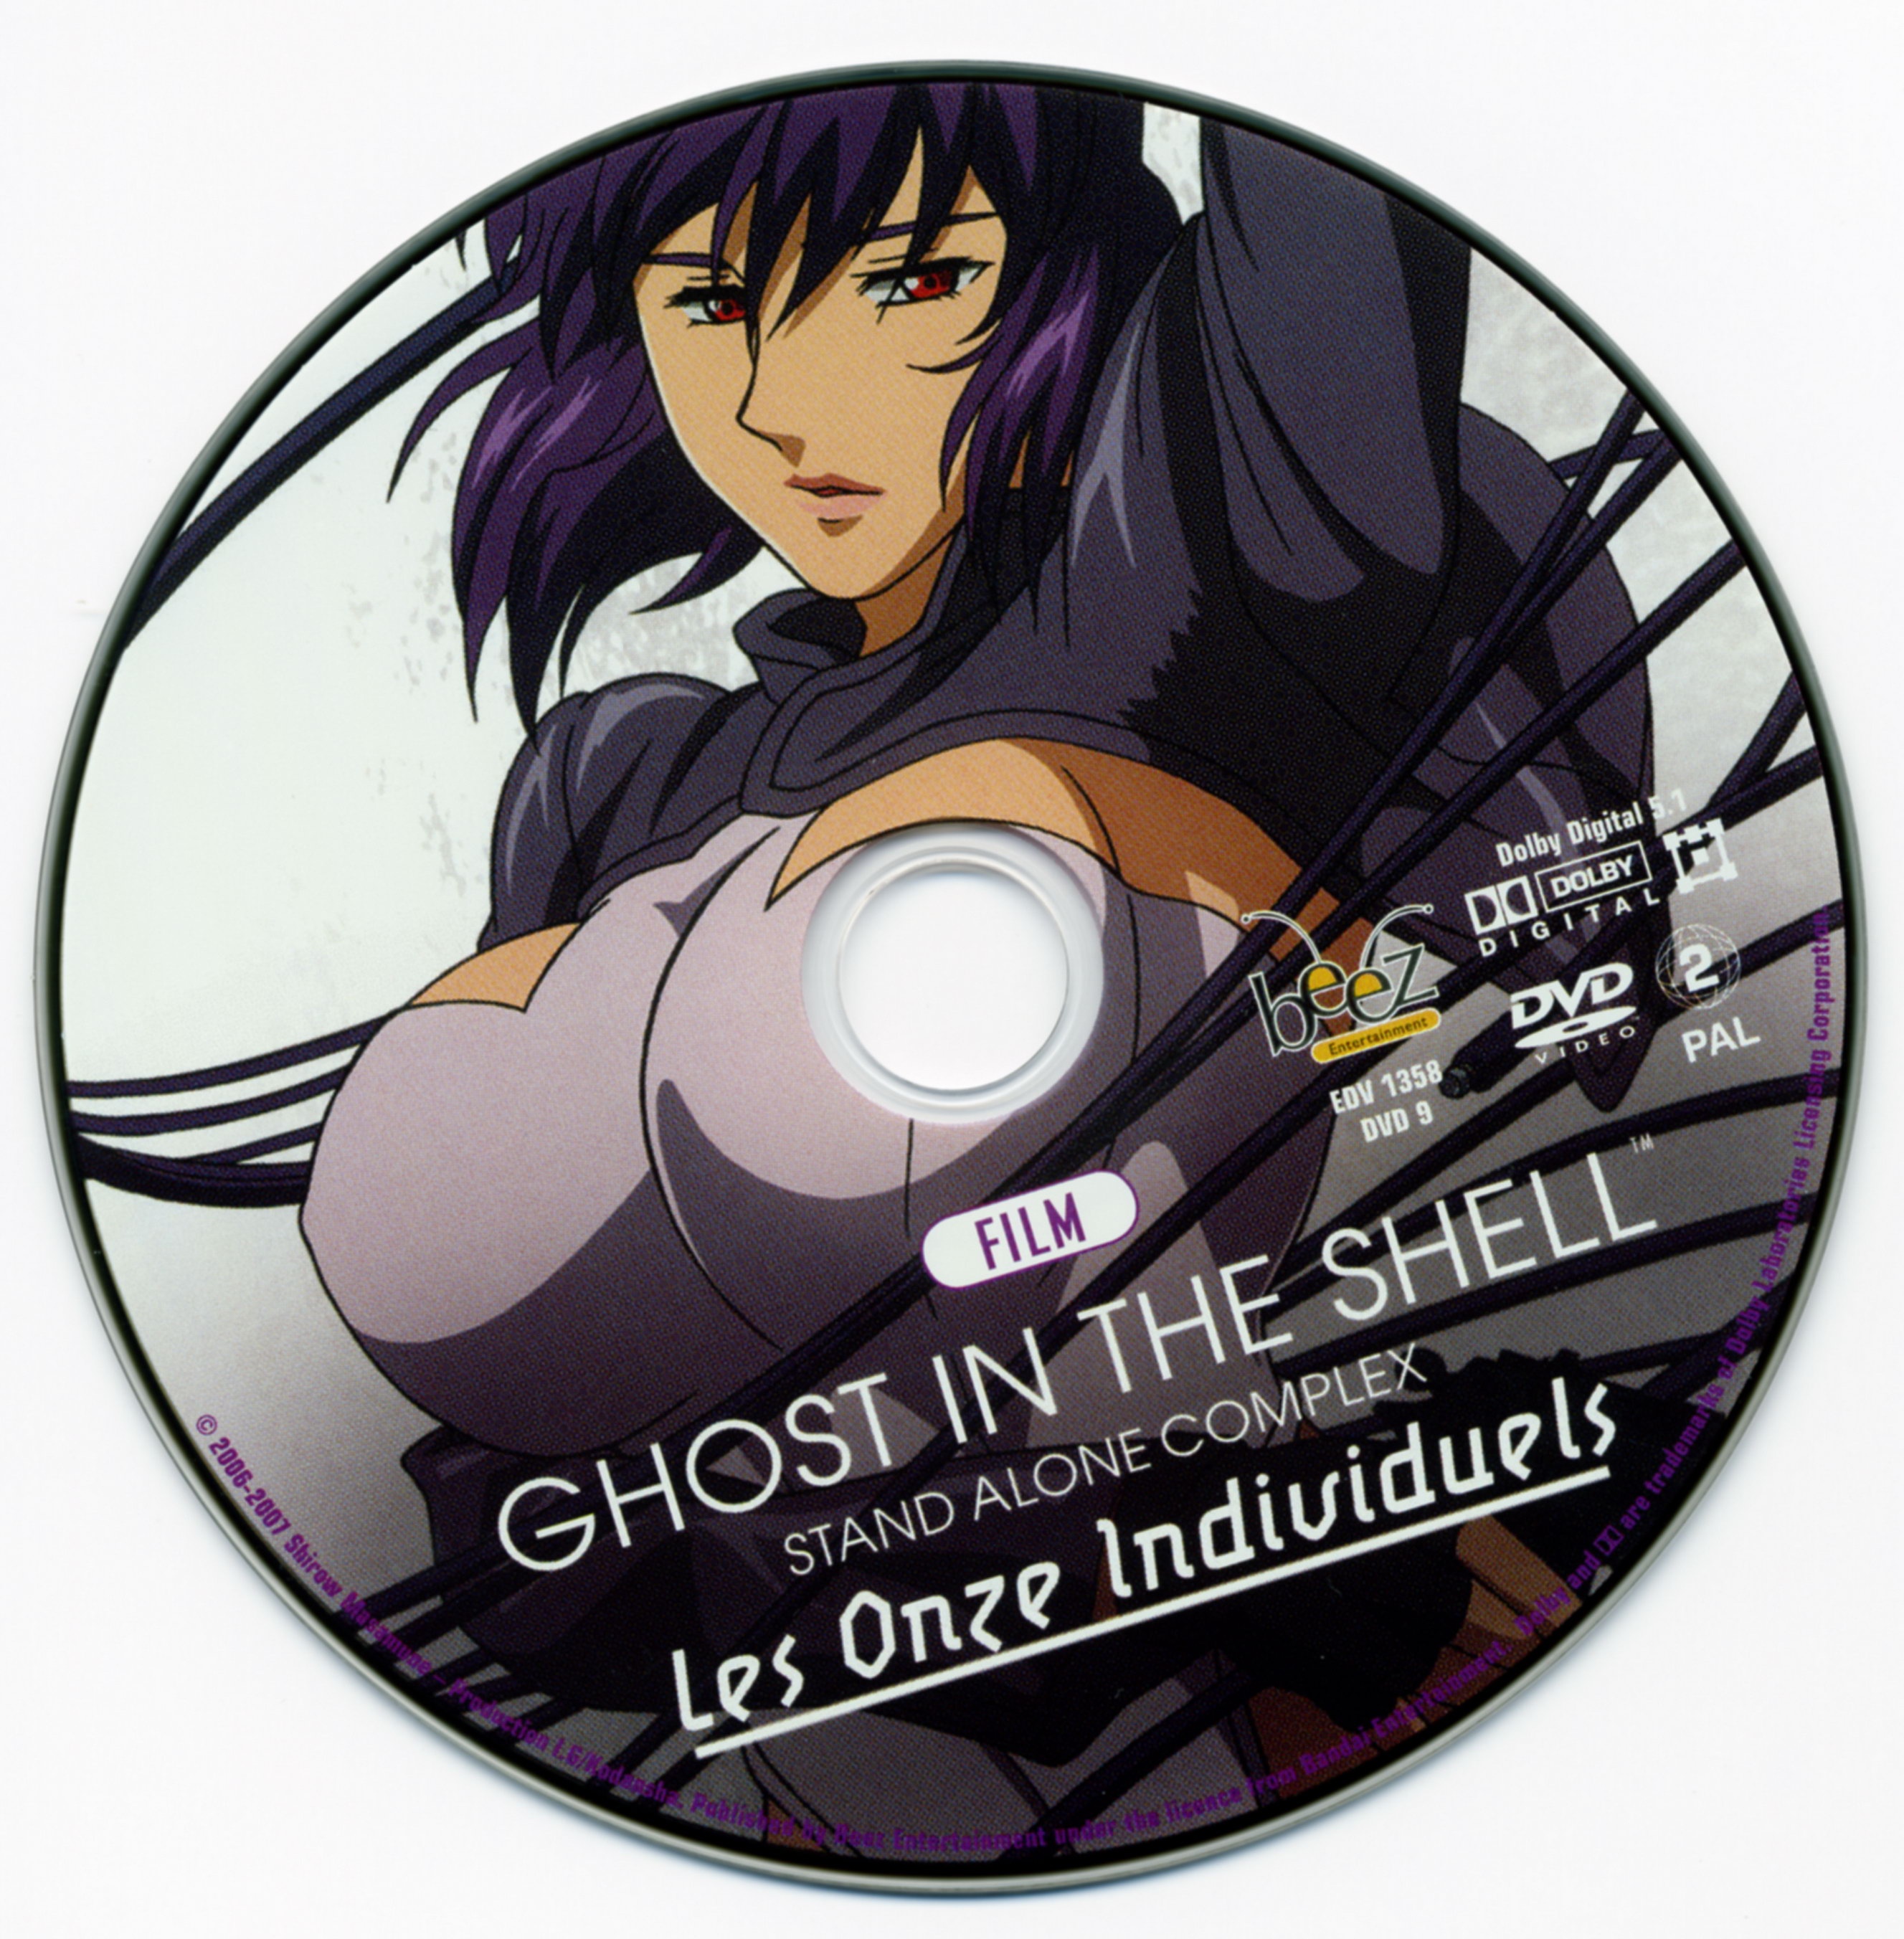 Ghost in the shell stand alone complexe les onze individuels DISC 1